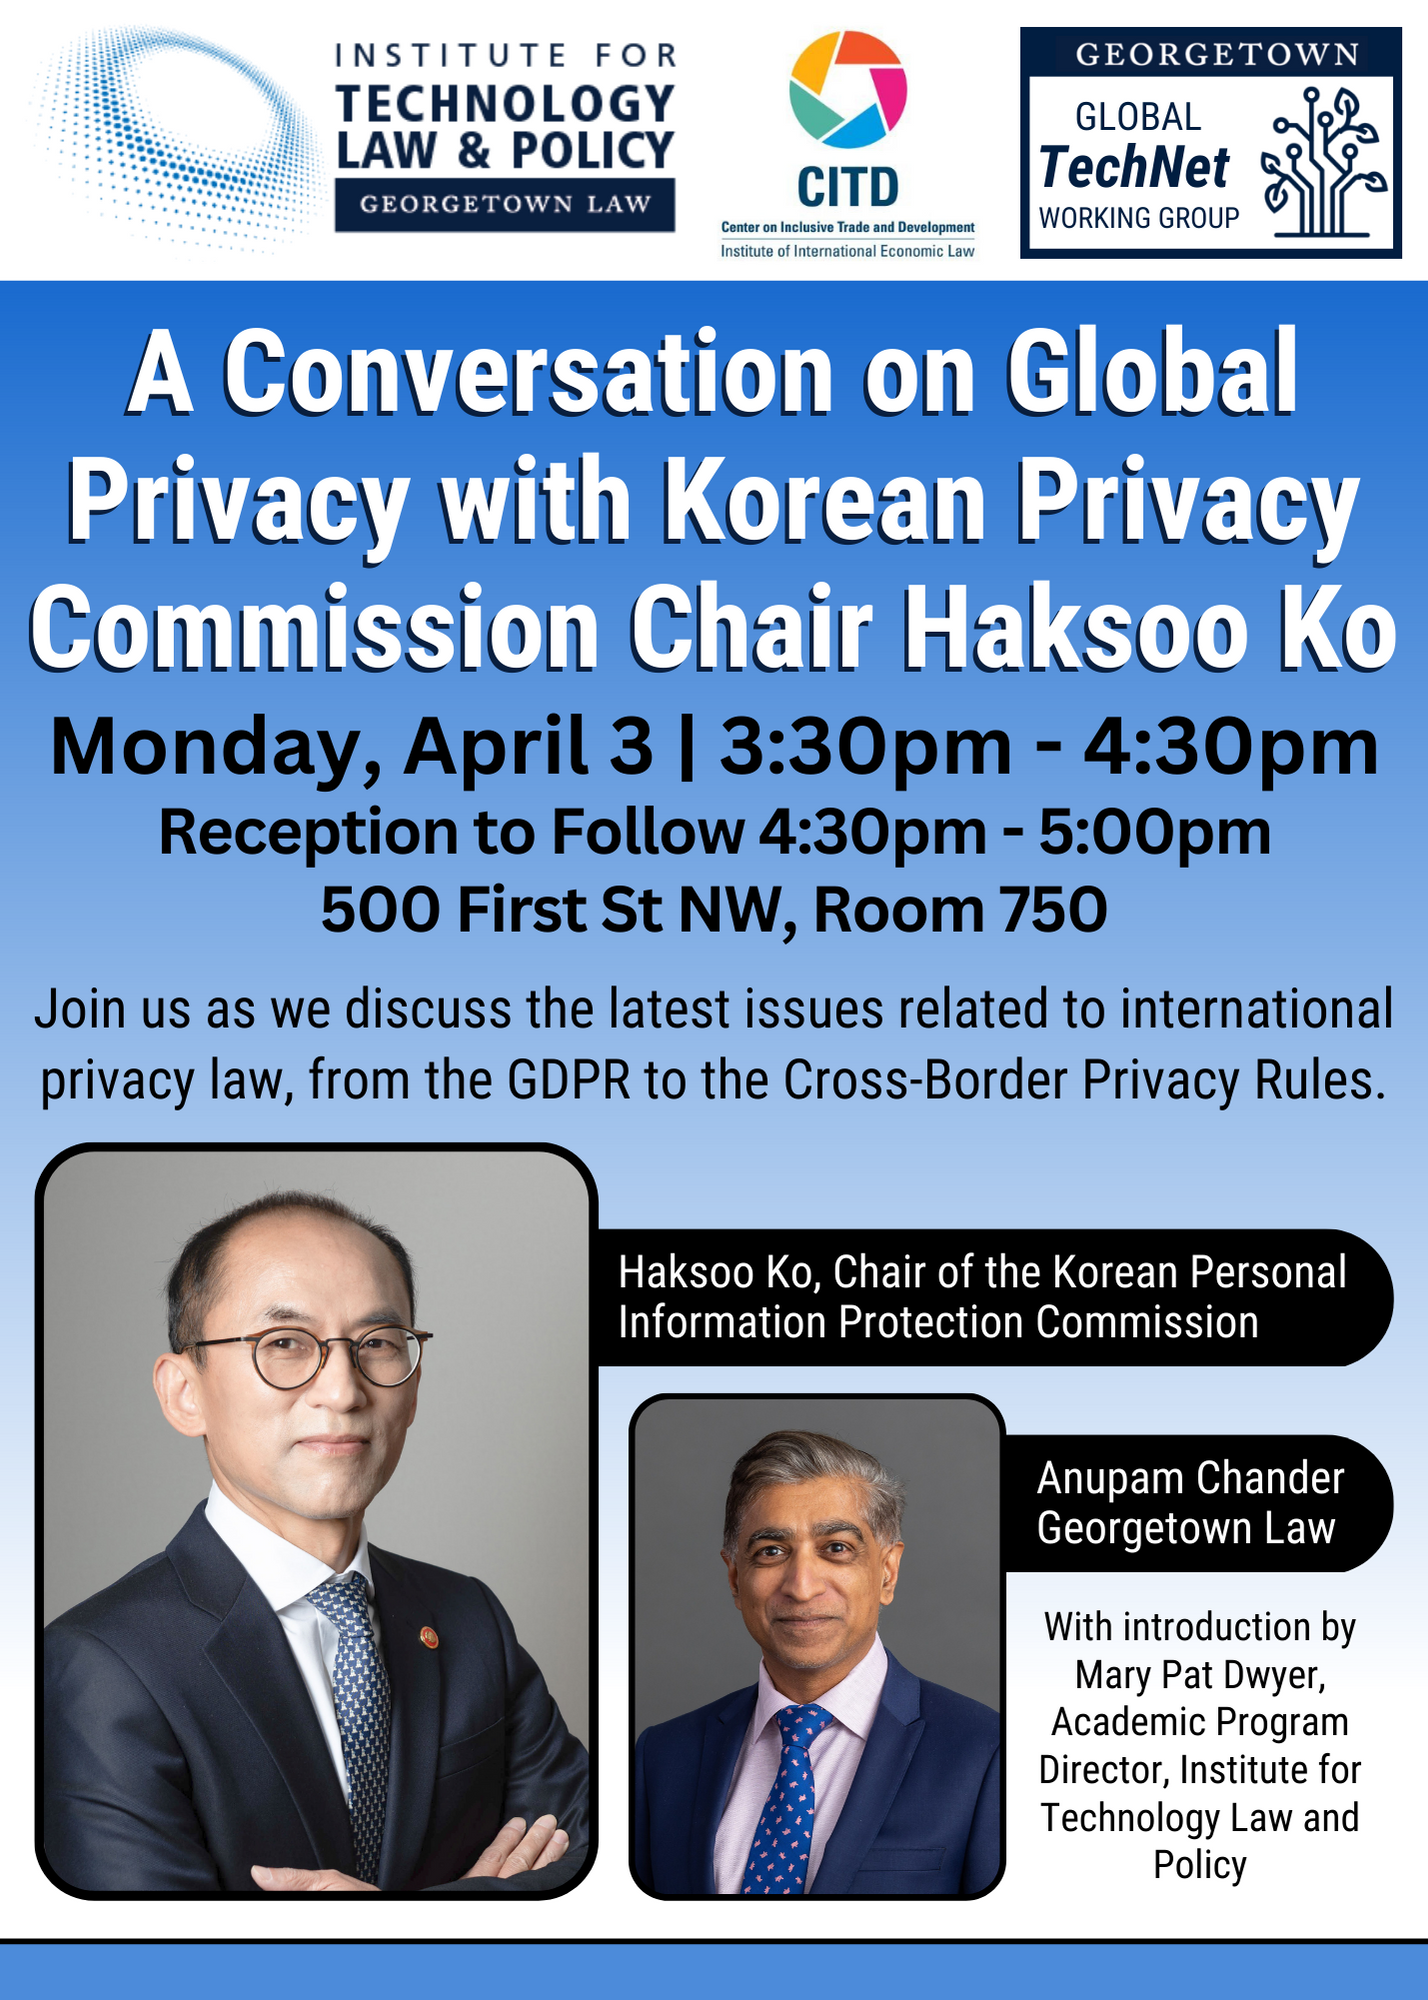 A Conversation on Global Privacy with Korean Privacy Commission Chair Haksoo Ko 